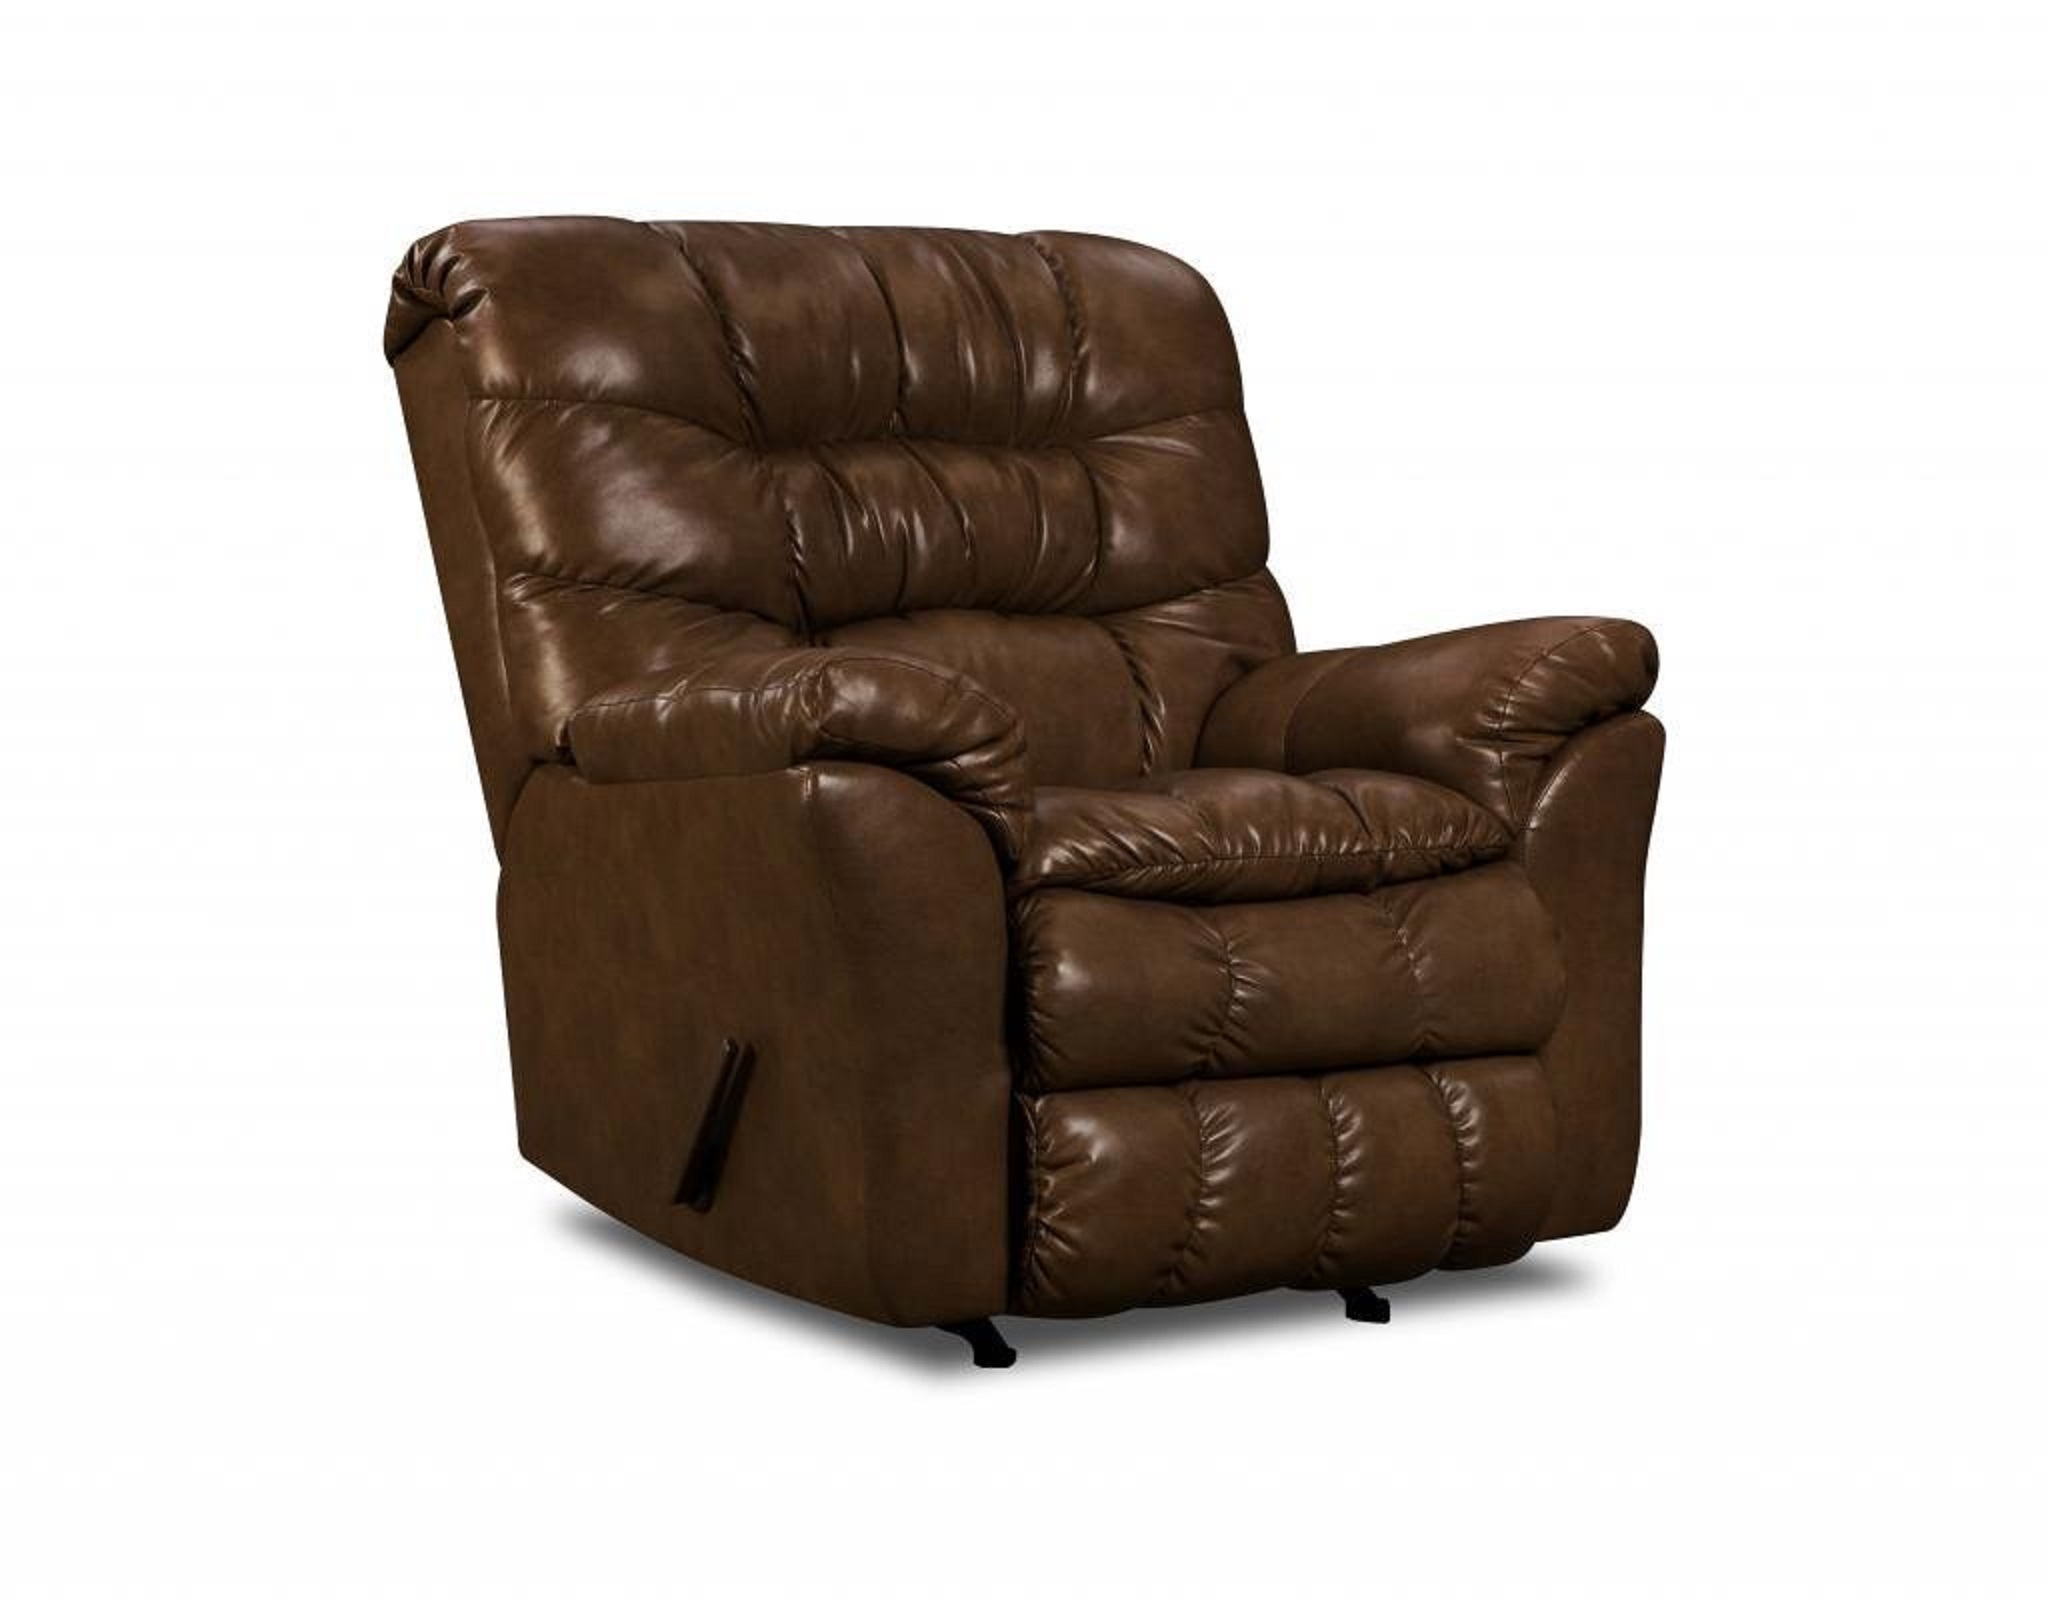 Simmons Upholstery 689, Simmons Leather Rocker Recliner